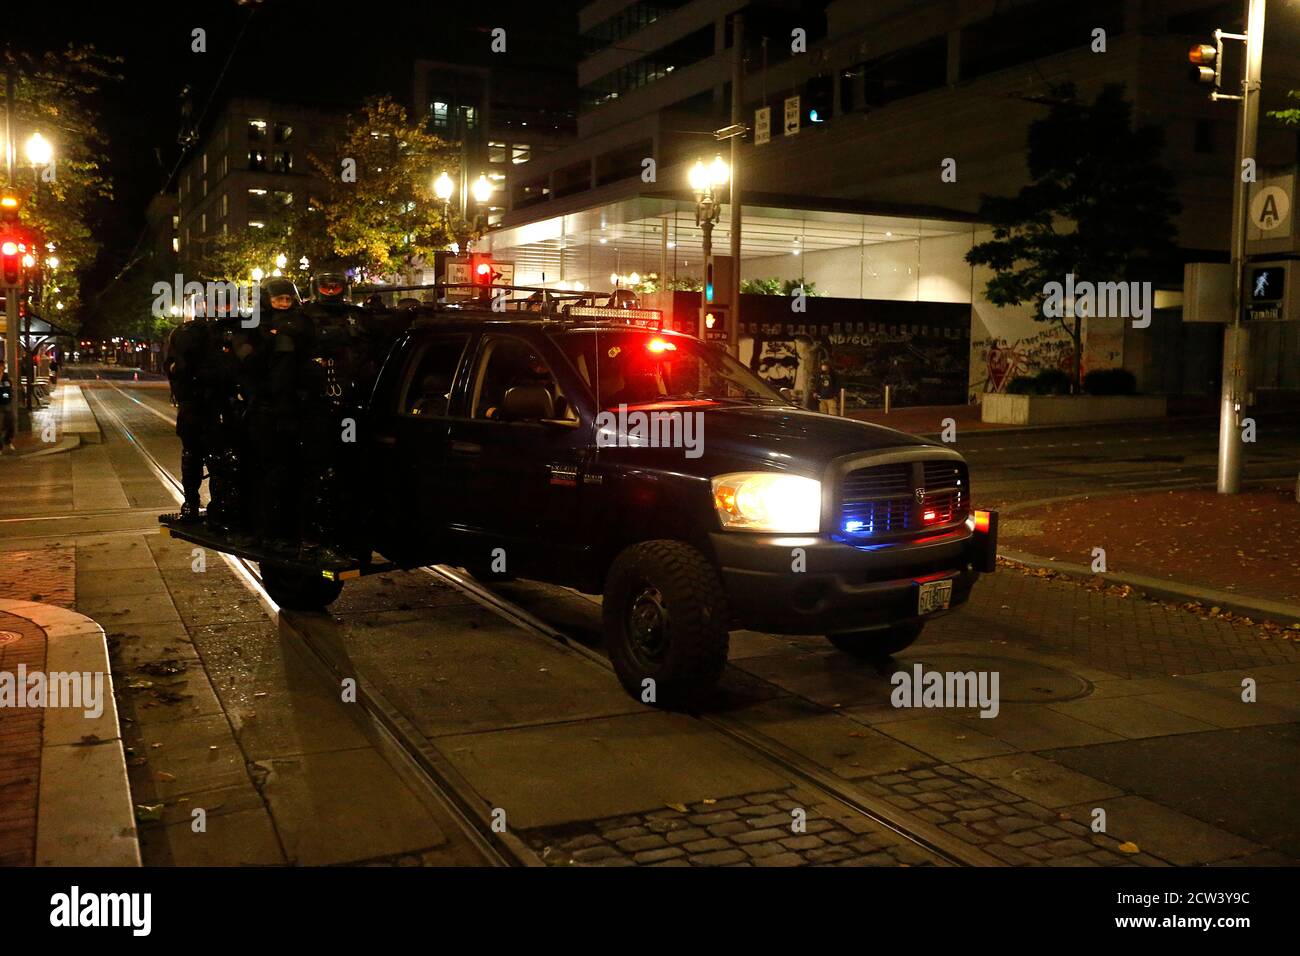 Police descend on protesters in fornt of the Police Bureau North Precinct on a night following several demonstrations around the city on September 26, 2020 in Portland Oregon. People demonstrate against. police violence and racial inequality in the downtown aea of the city. (Photo By John Lamparski/SIPA USA) Credit: Sipa USA/Alamy Live News Stock Photo